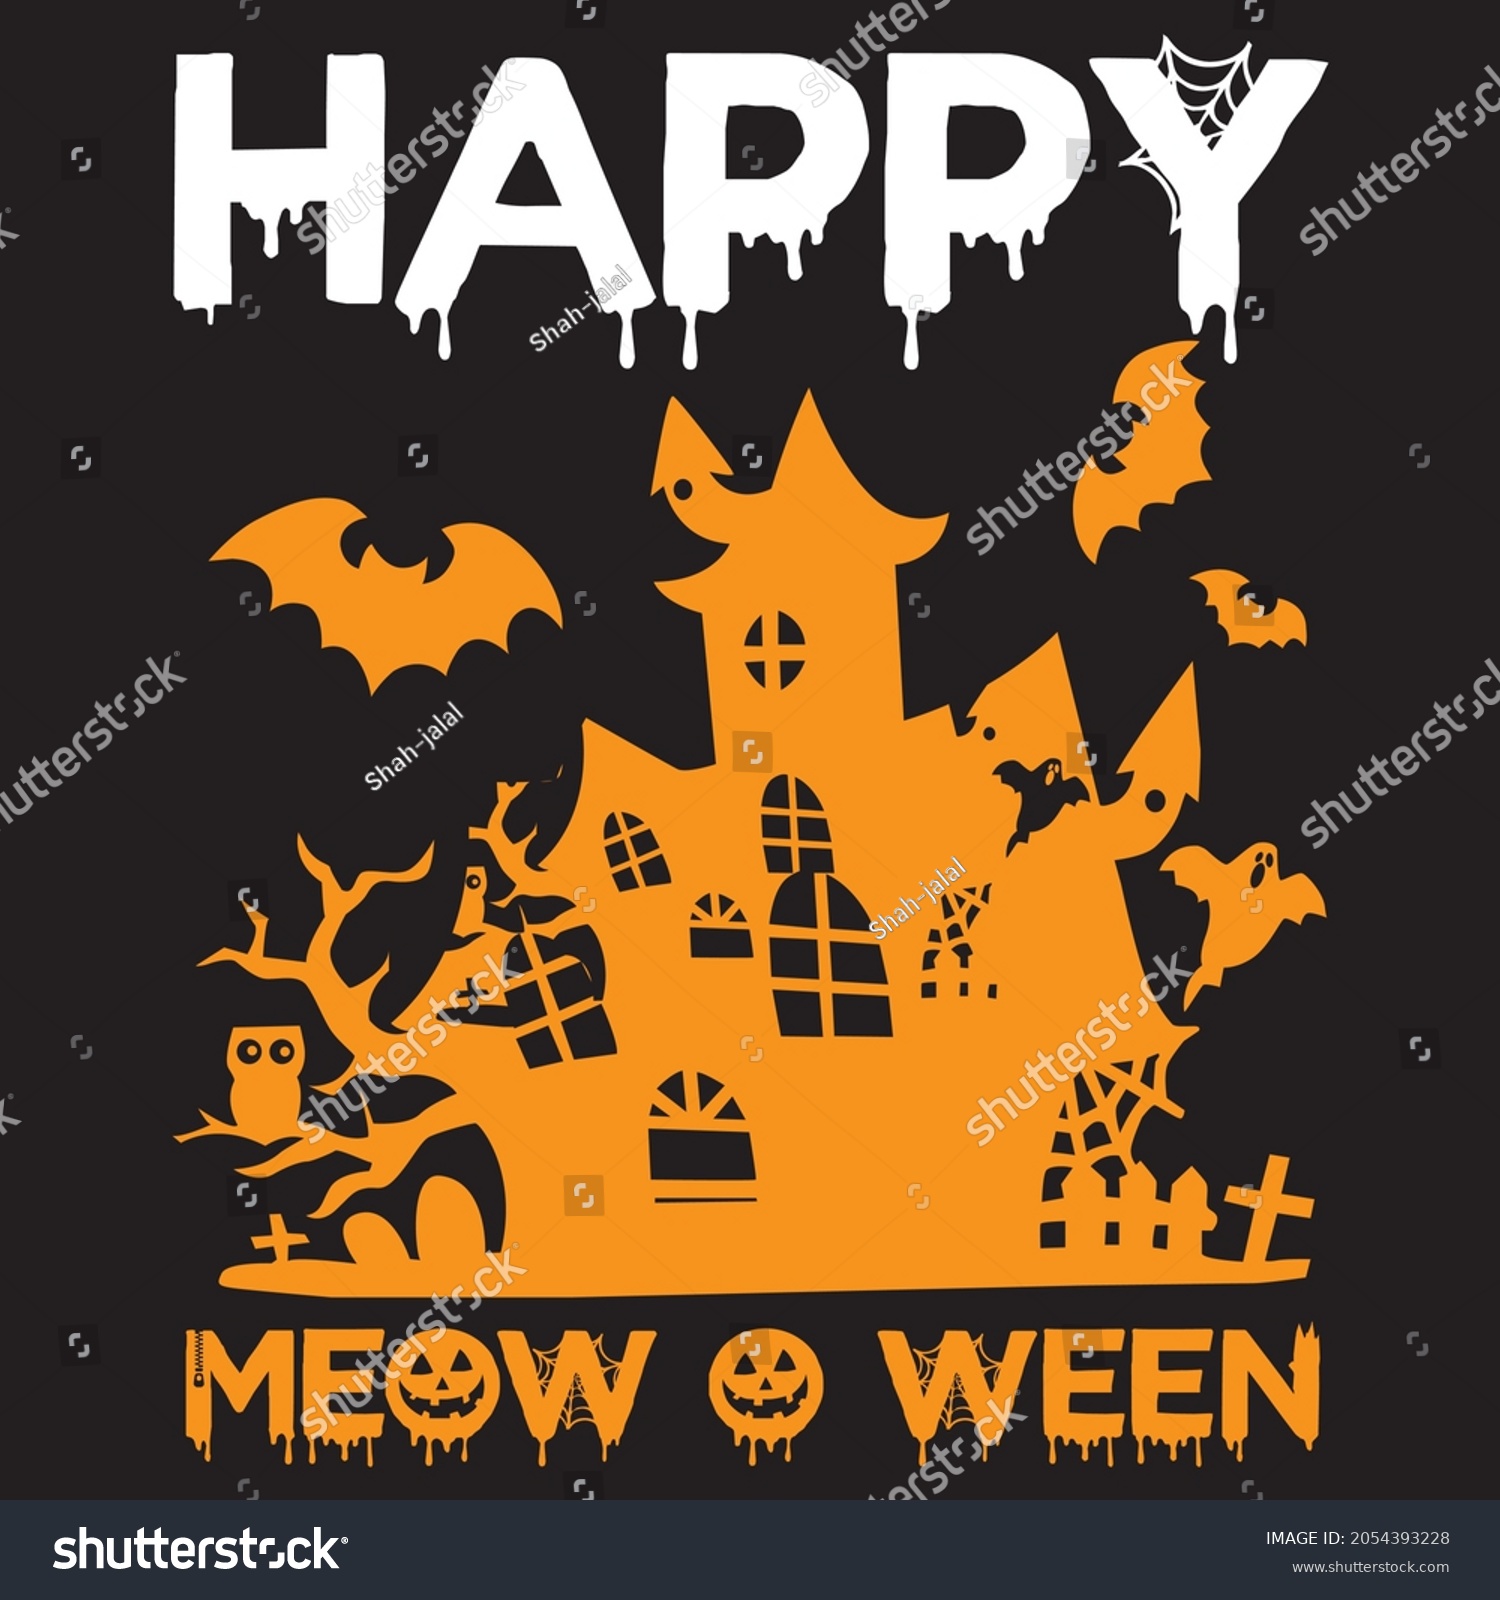 SVG of happy meow ween t shirt design, vector file. svg